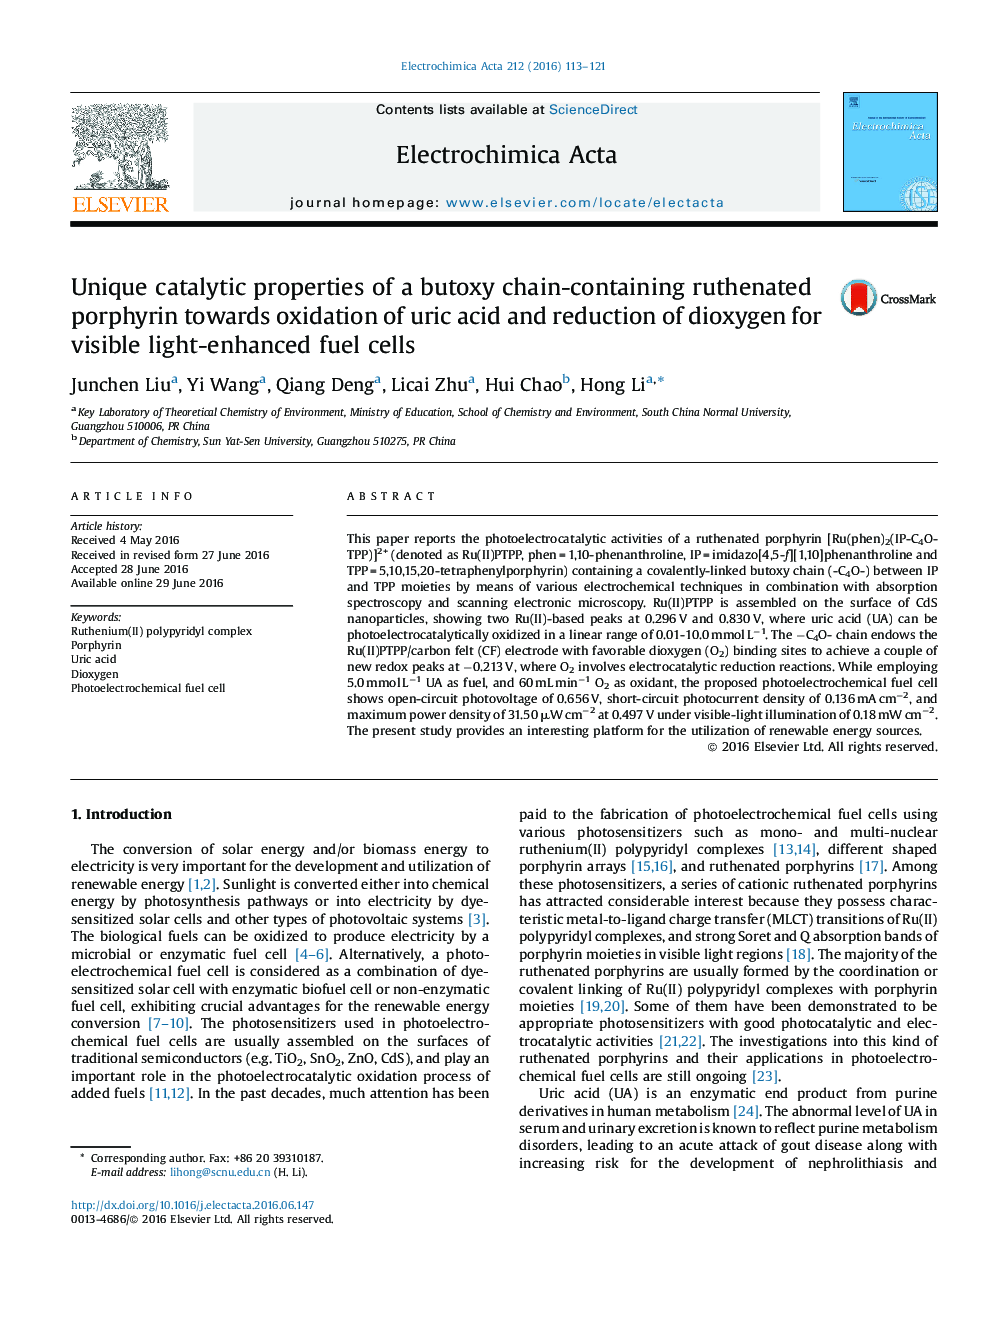 Unique catalytic properties of a butoxy chain-containing ruthenated porphyrin towards oxidation of uric acid and reduction of dioxygen for visible light-enhanced fuel cells